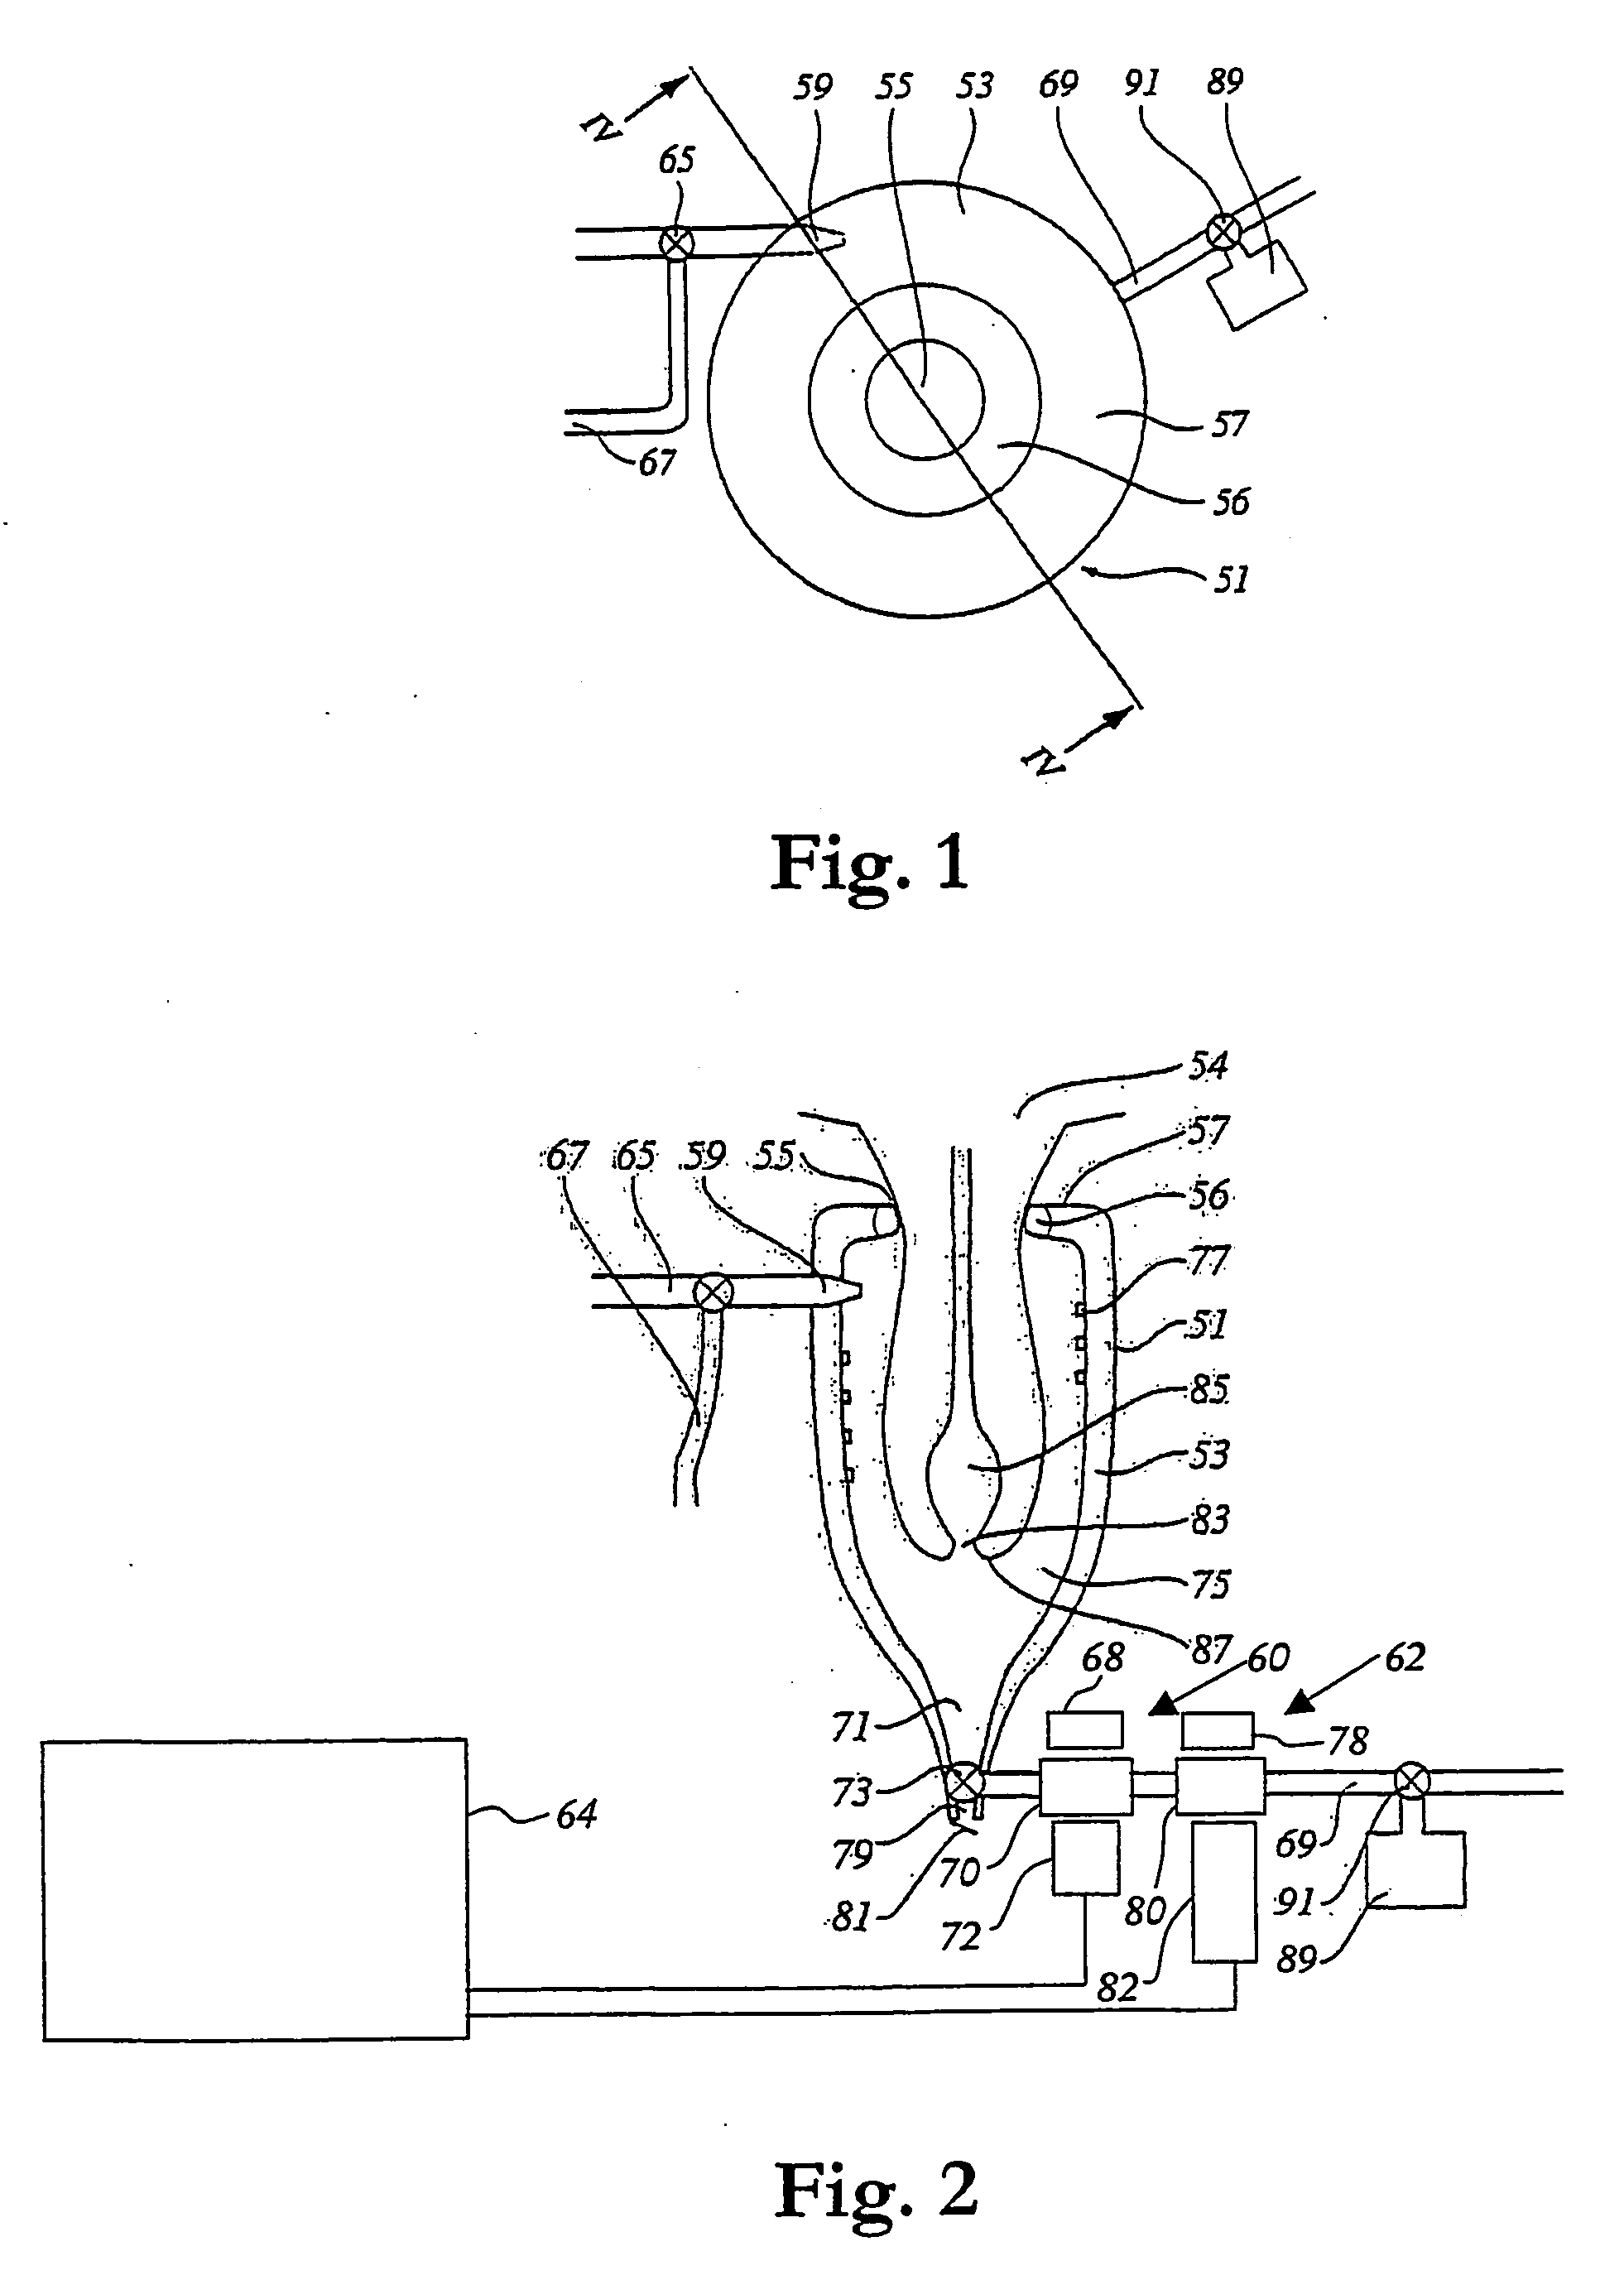 Apparatus and method for cleaning and pre-milking a teat of a milking animal